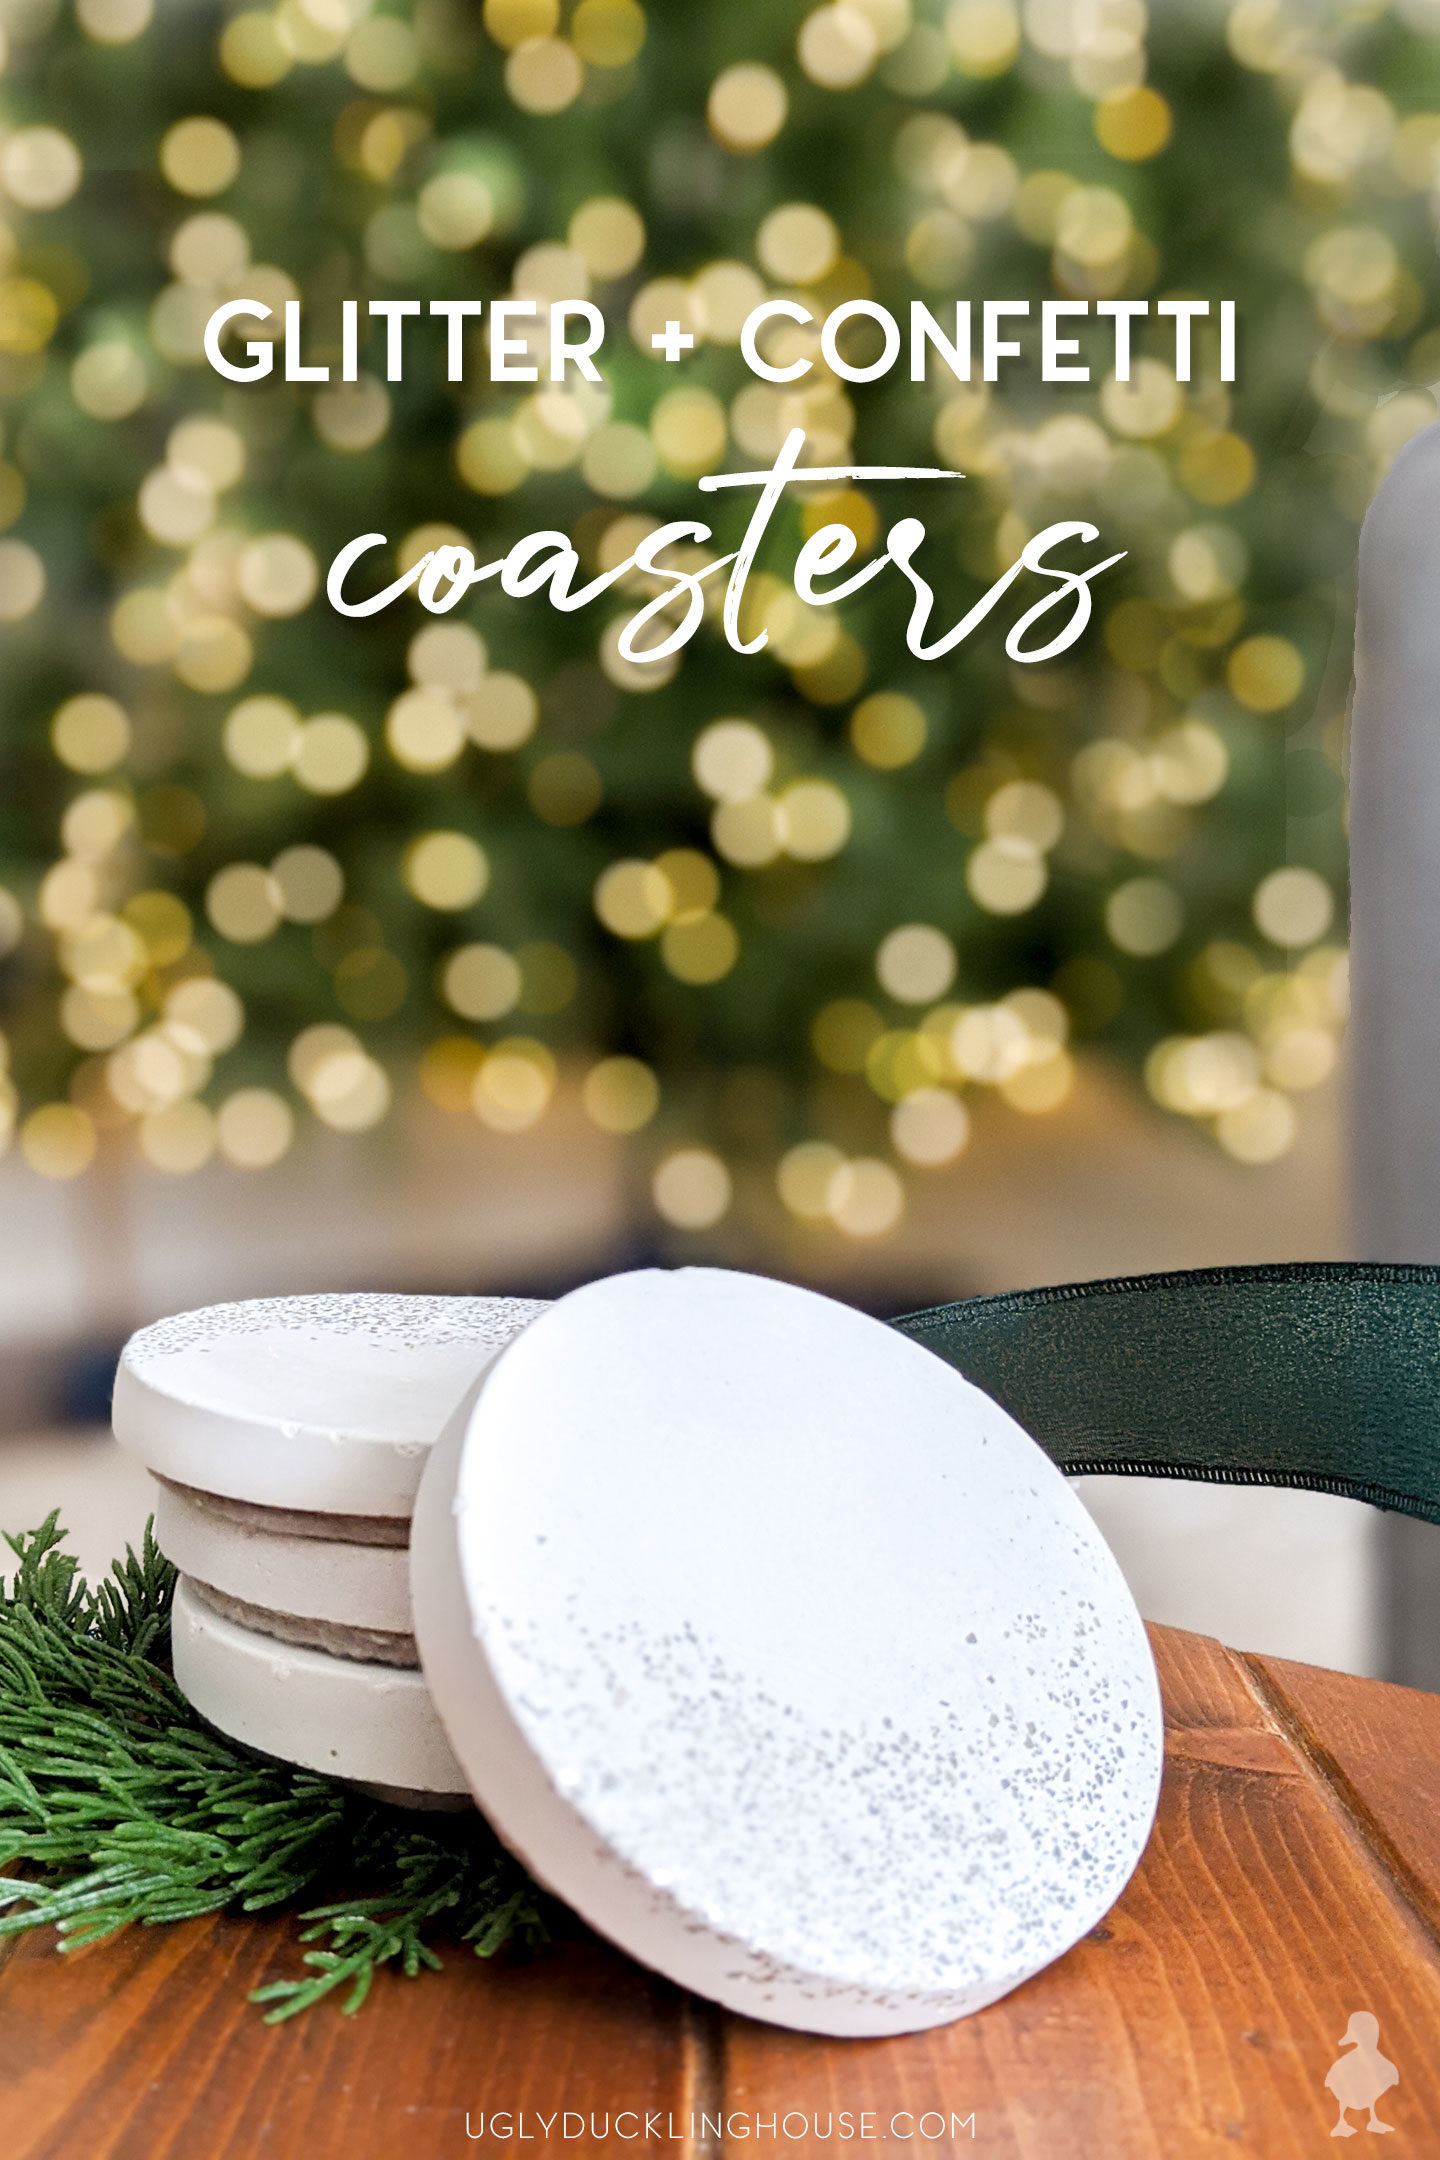 glitter white concrete coasters for my coffee table or hostess gift #whiteconcrete #diycoasters #glitter #confetti #newyears #partydecoration #hostessgift #neighborgift